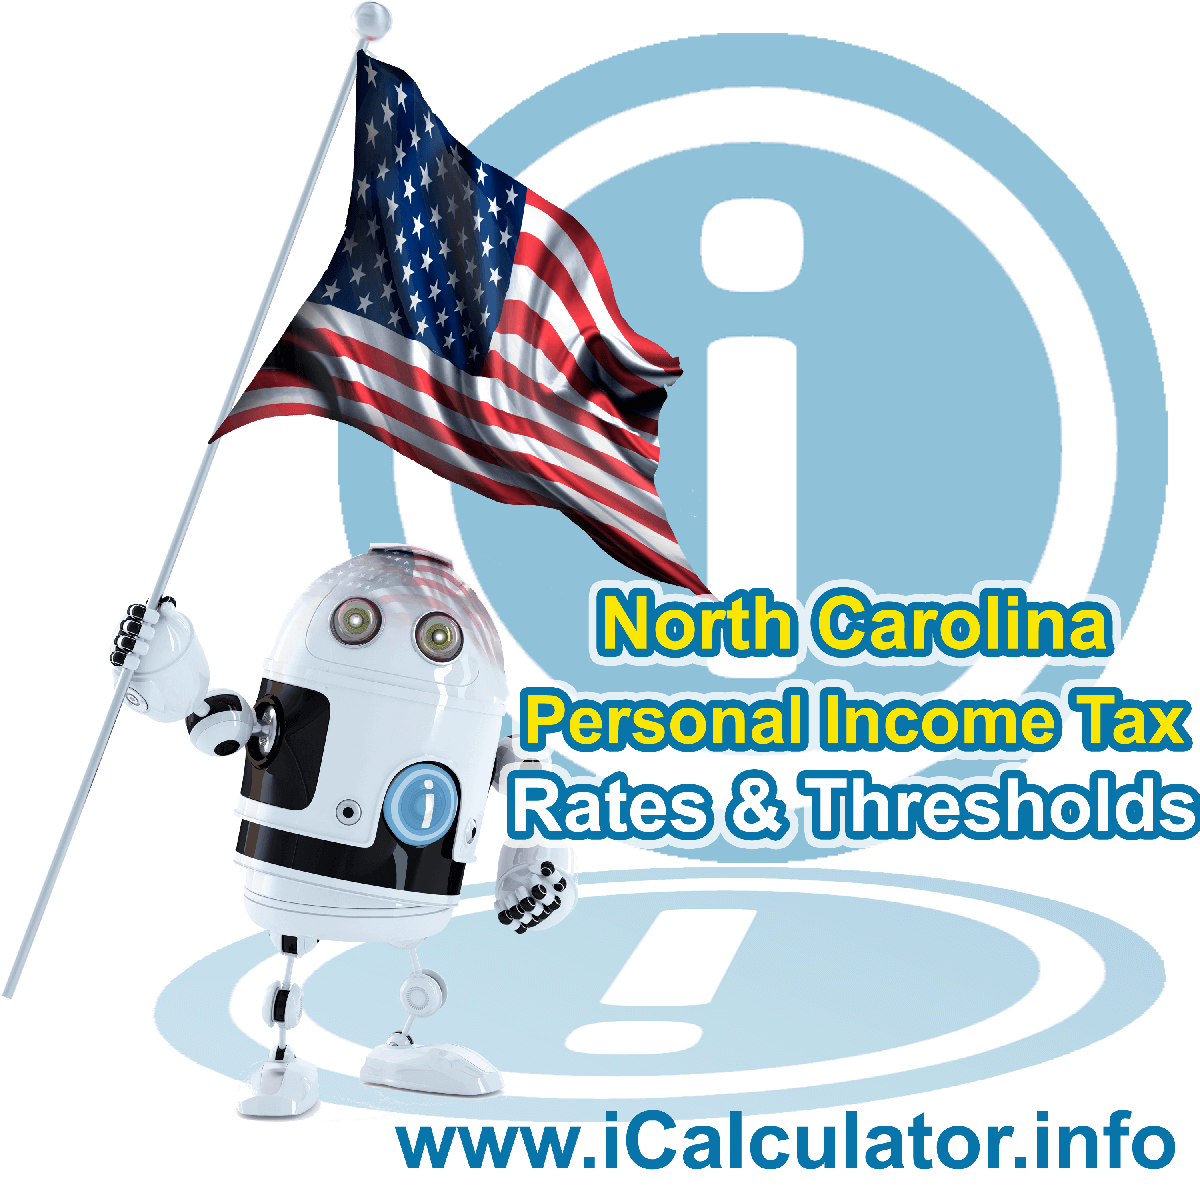 North Carolina State Tax Tables 2023. This image displays details of the North Carolina State Tax Tables for the 2023 tax return year which is provided in support of the 2023 US Tax Calculator